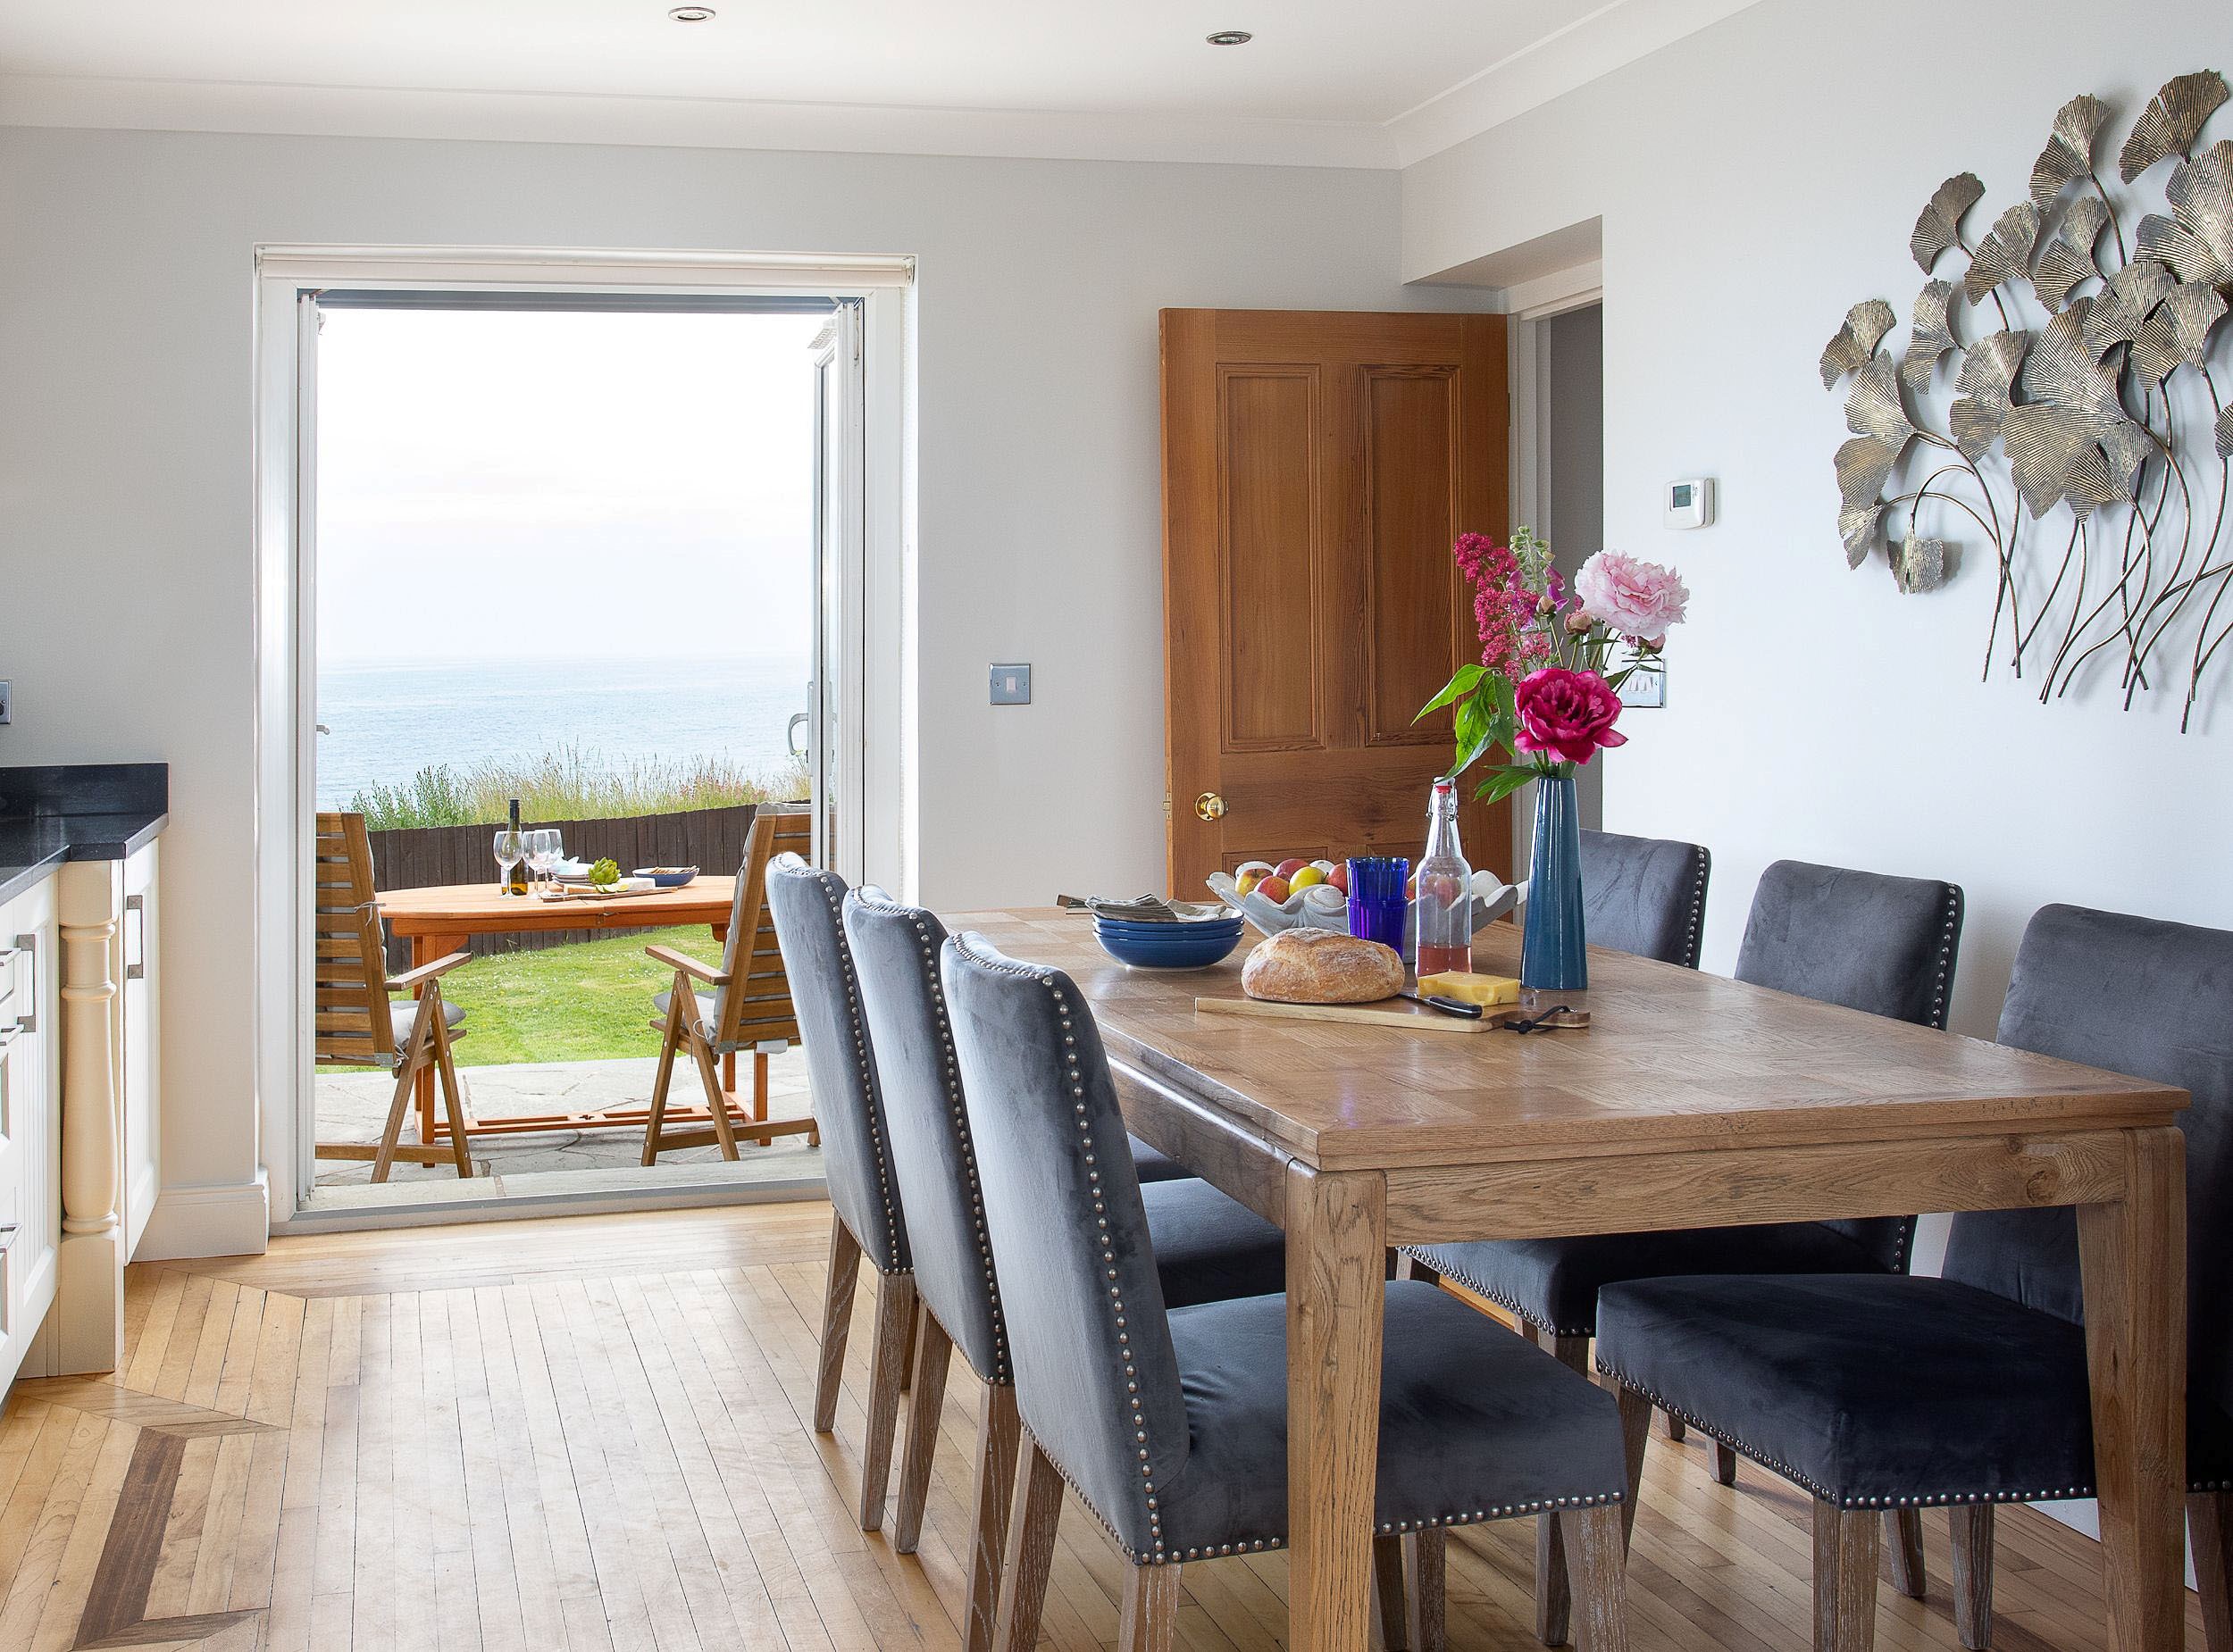 Sea Breeze - kitchen and dining table with French doors leading out to the patio